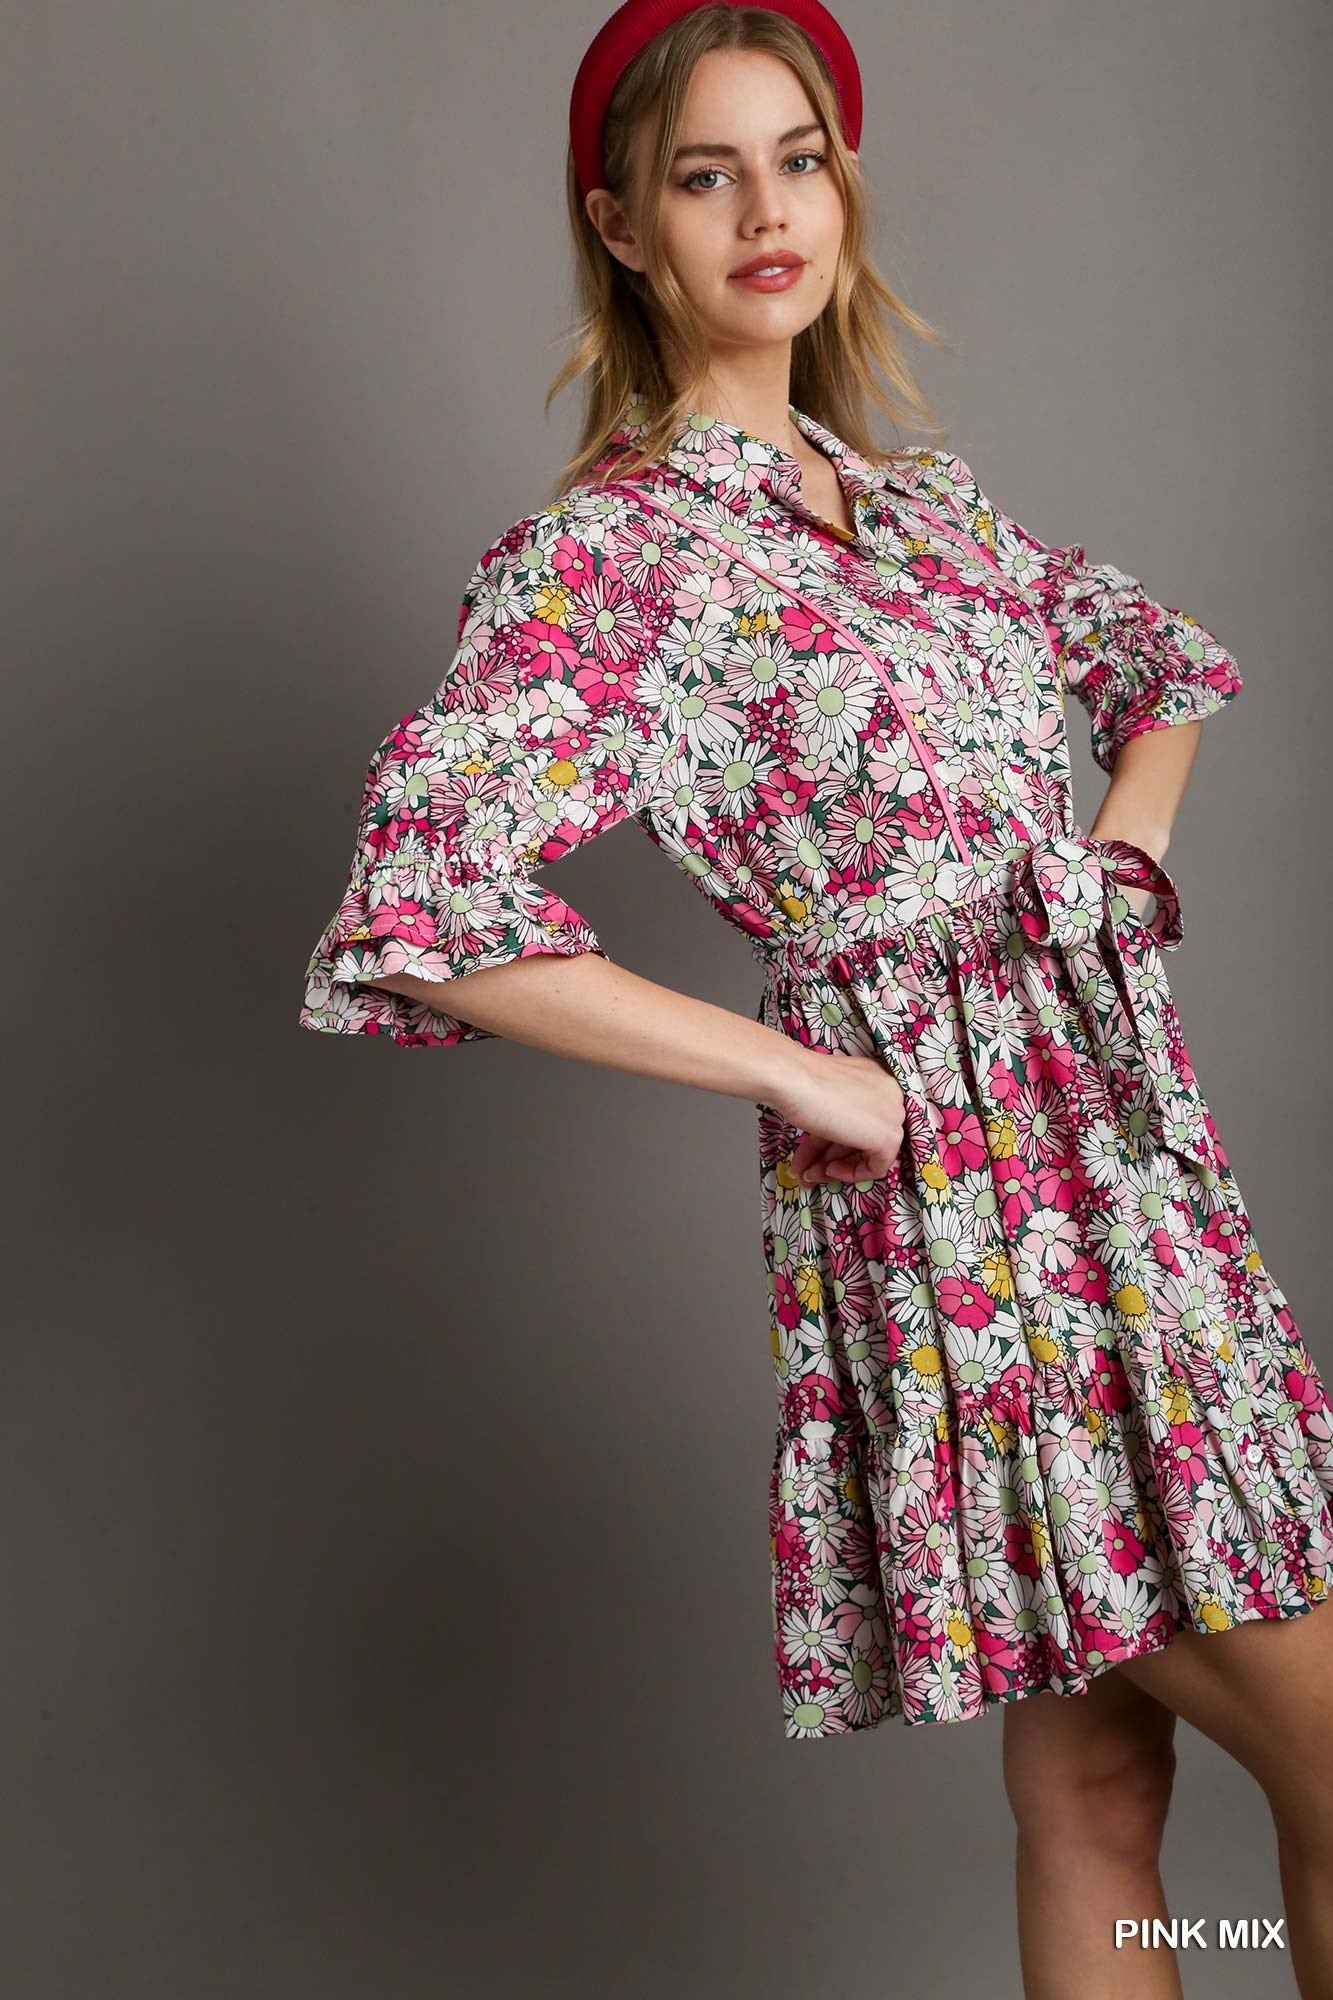 Flower Print A-line Umgee Dress with Collar, Waist Belt Tie, 3/4 Ruffle Sleeves accented with Piping K7860